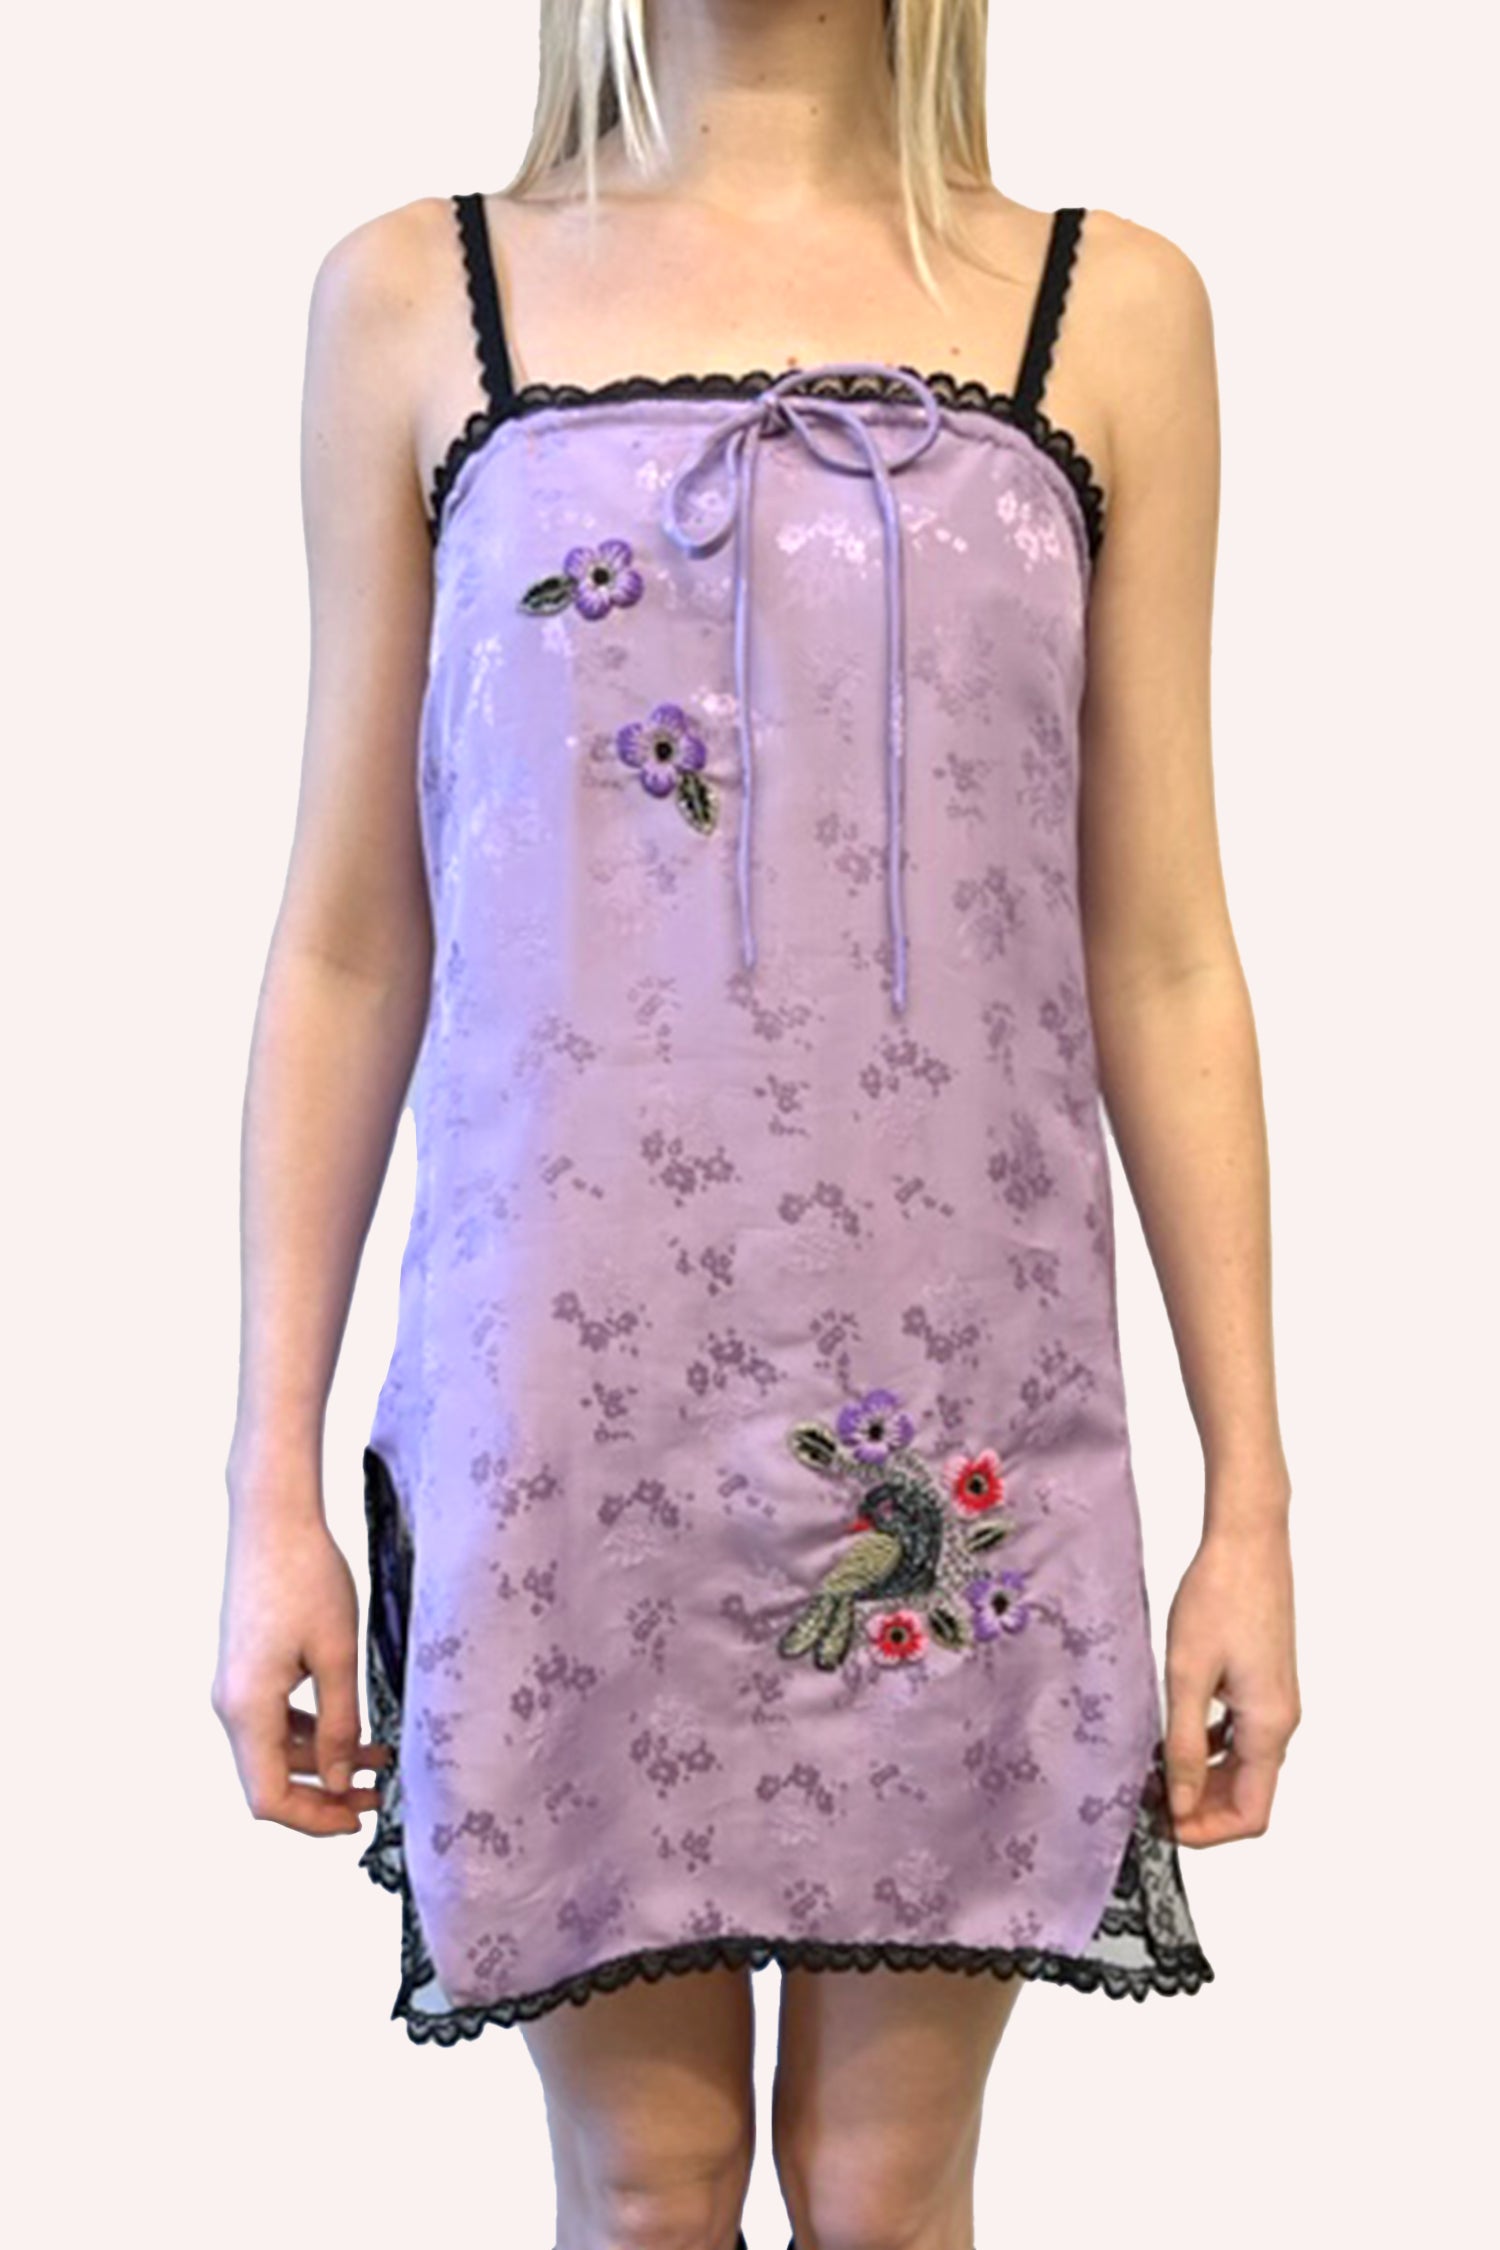 Dress, 2-purple flowers on the top right, bouquet of green/red flower like bird on left tight